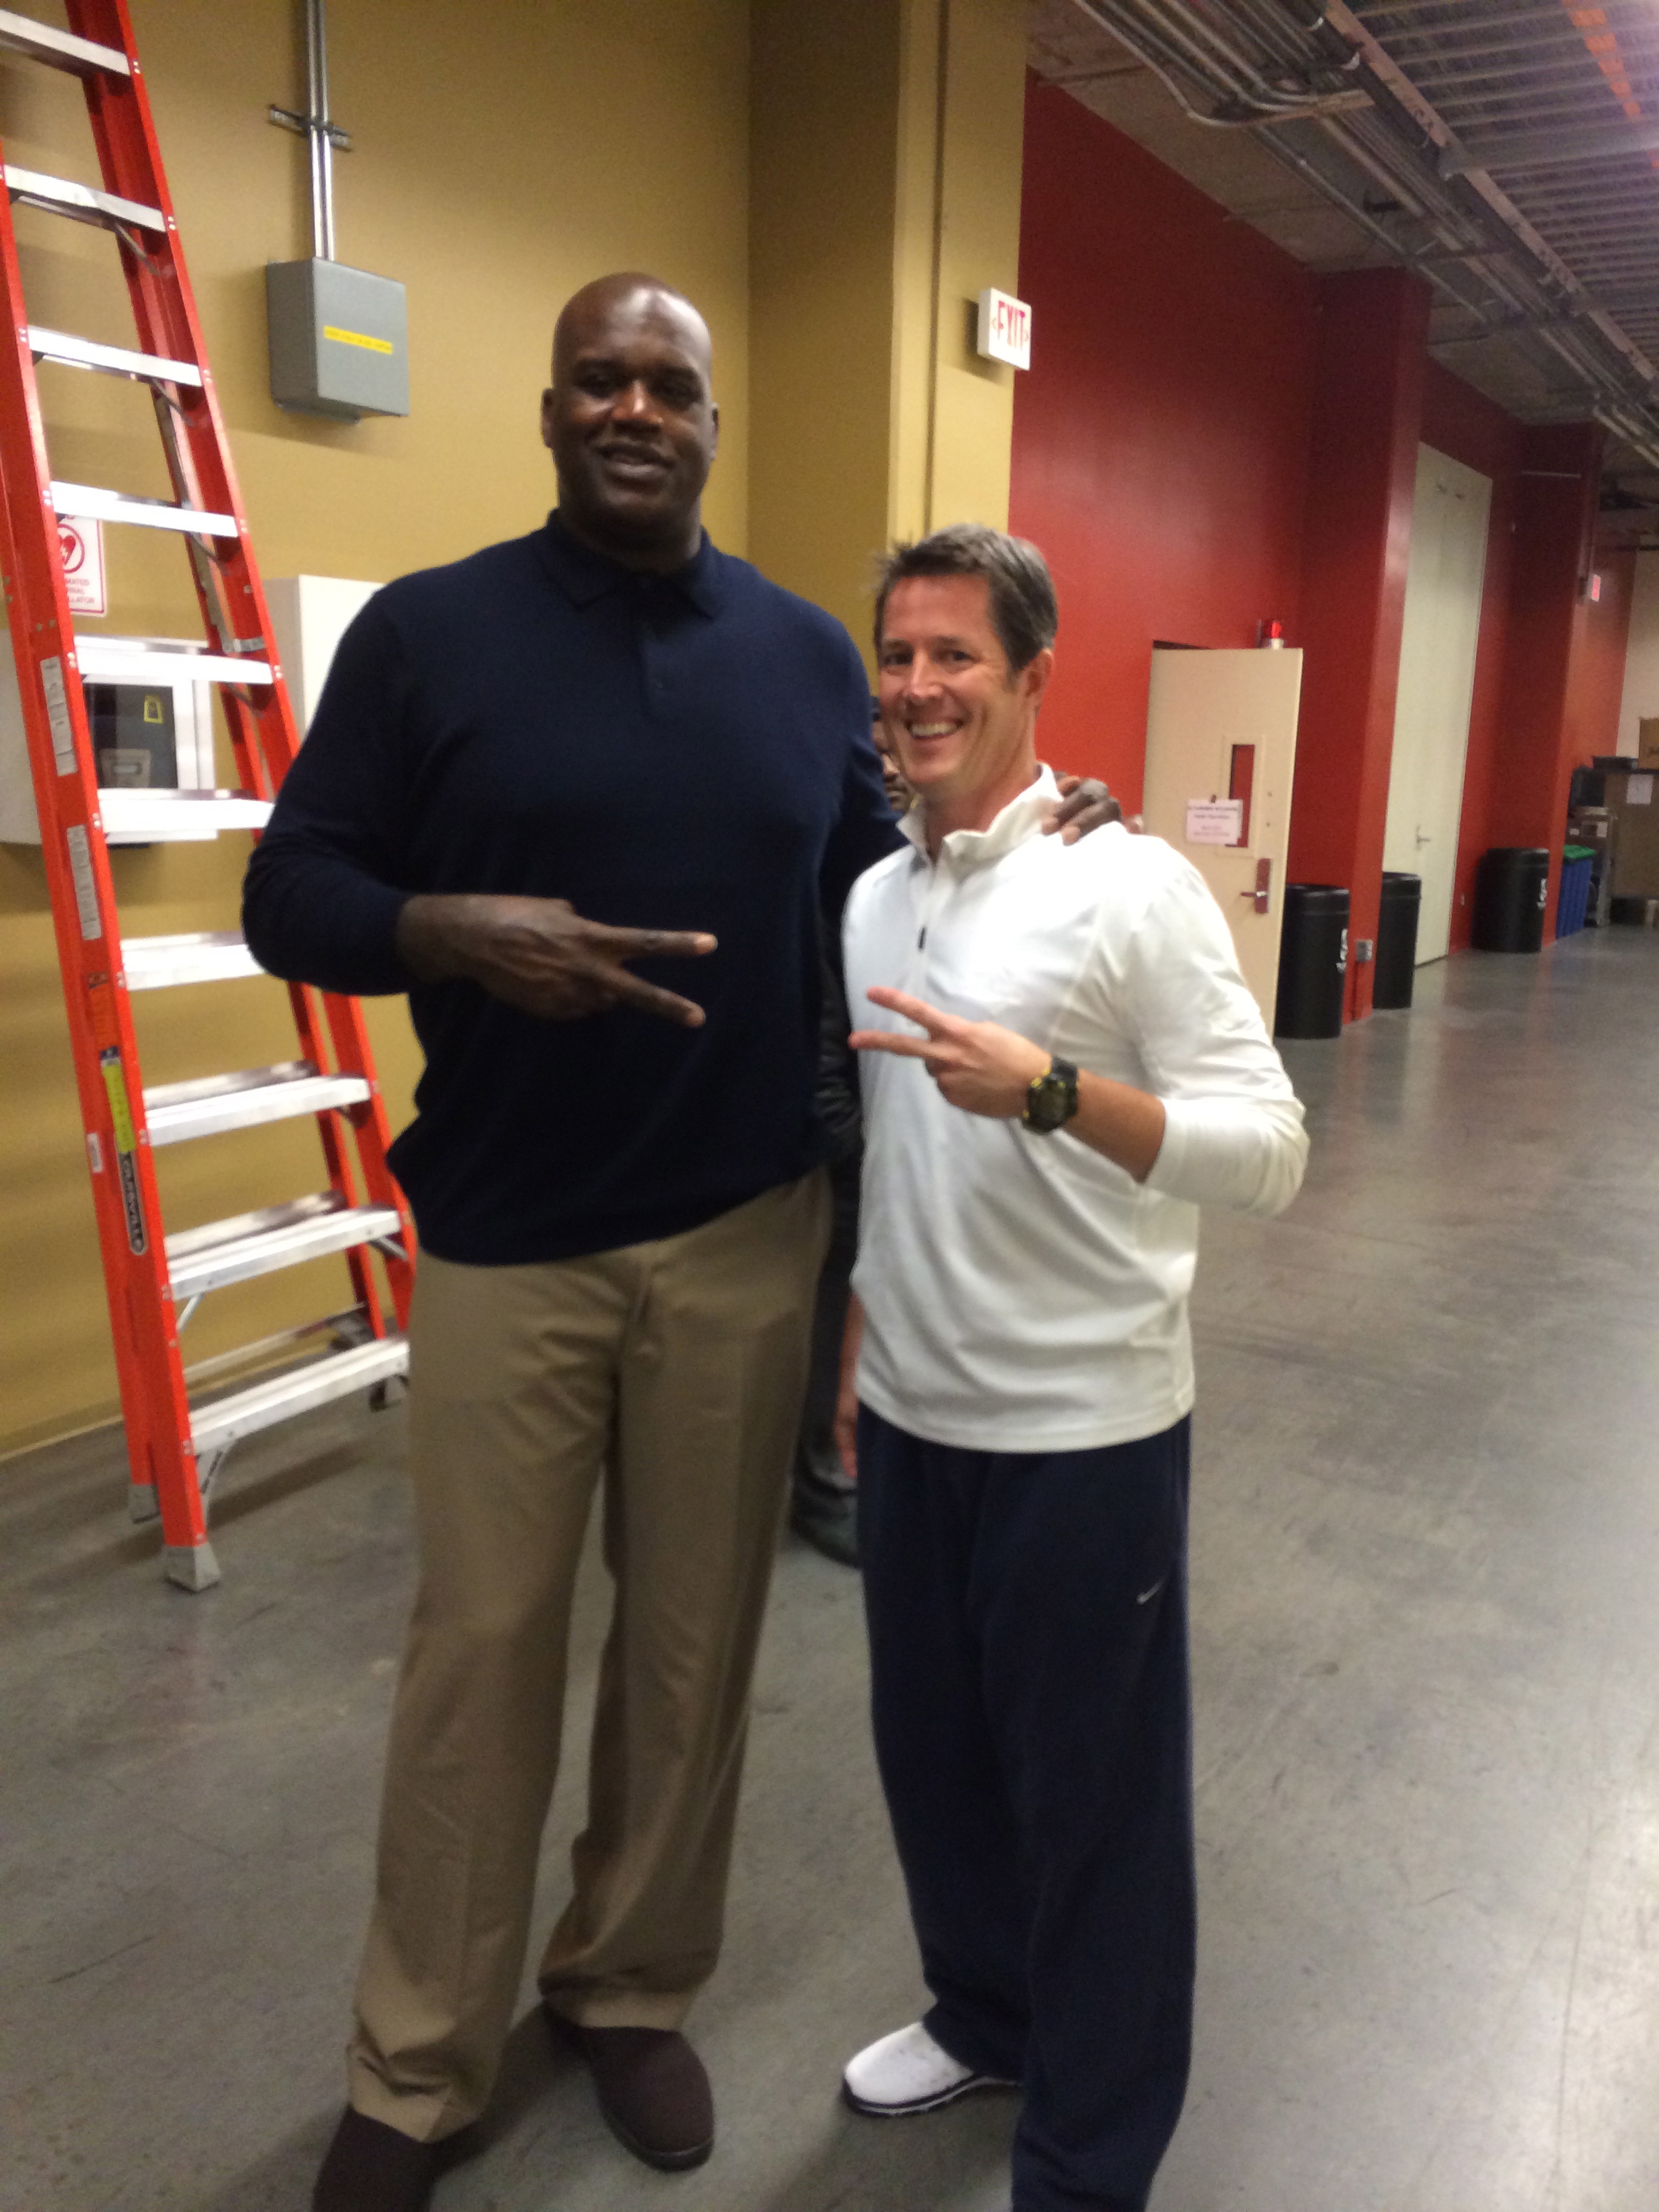 Kicking it with Shaq during a commercial shoot